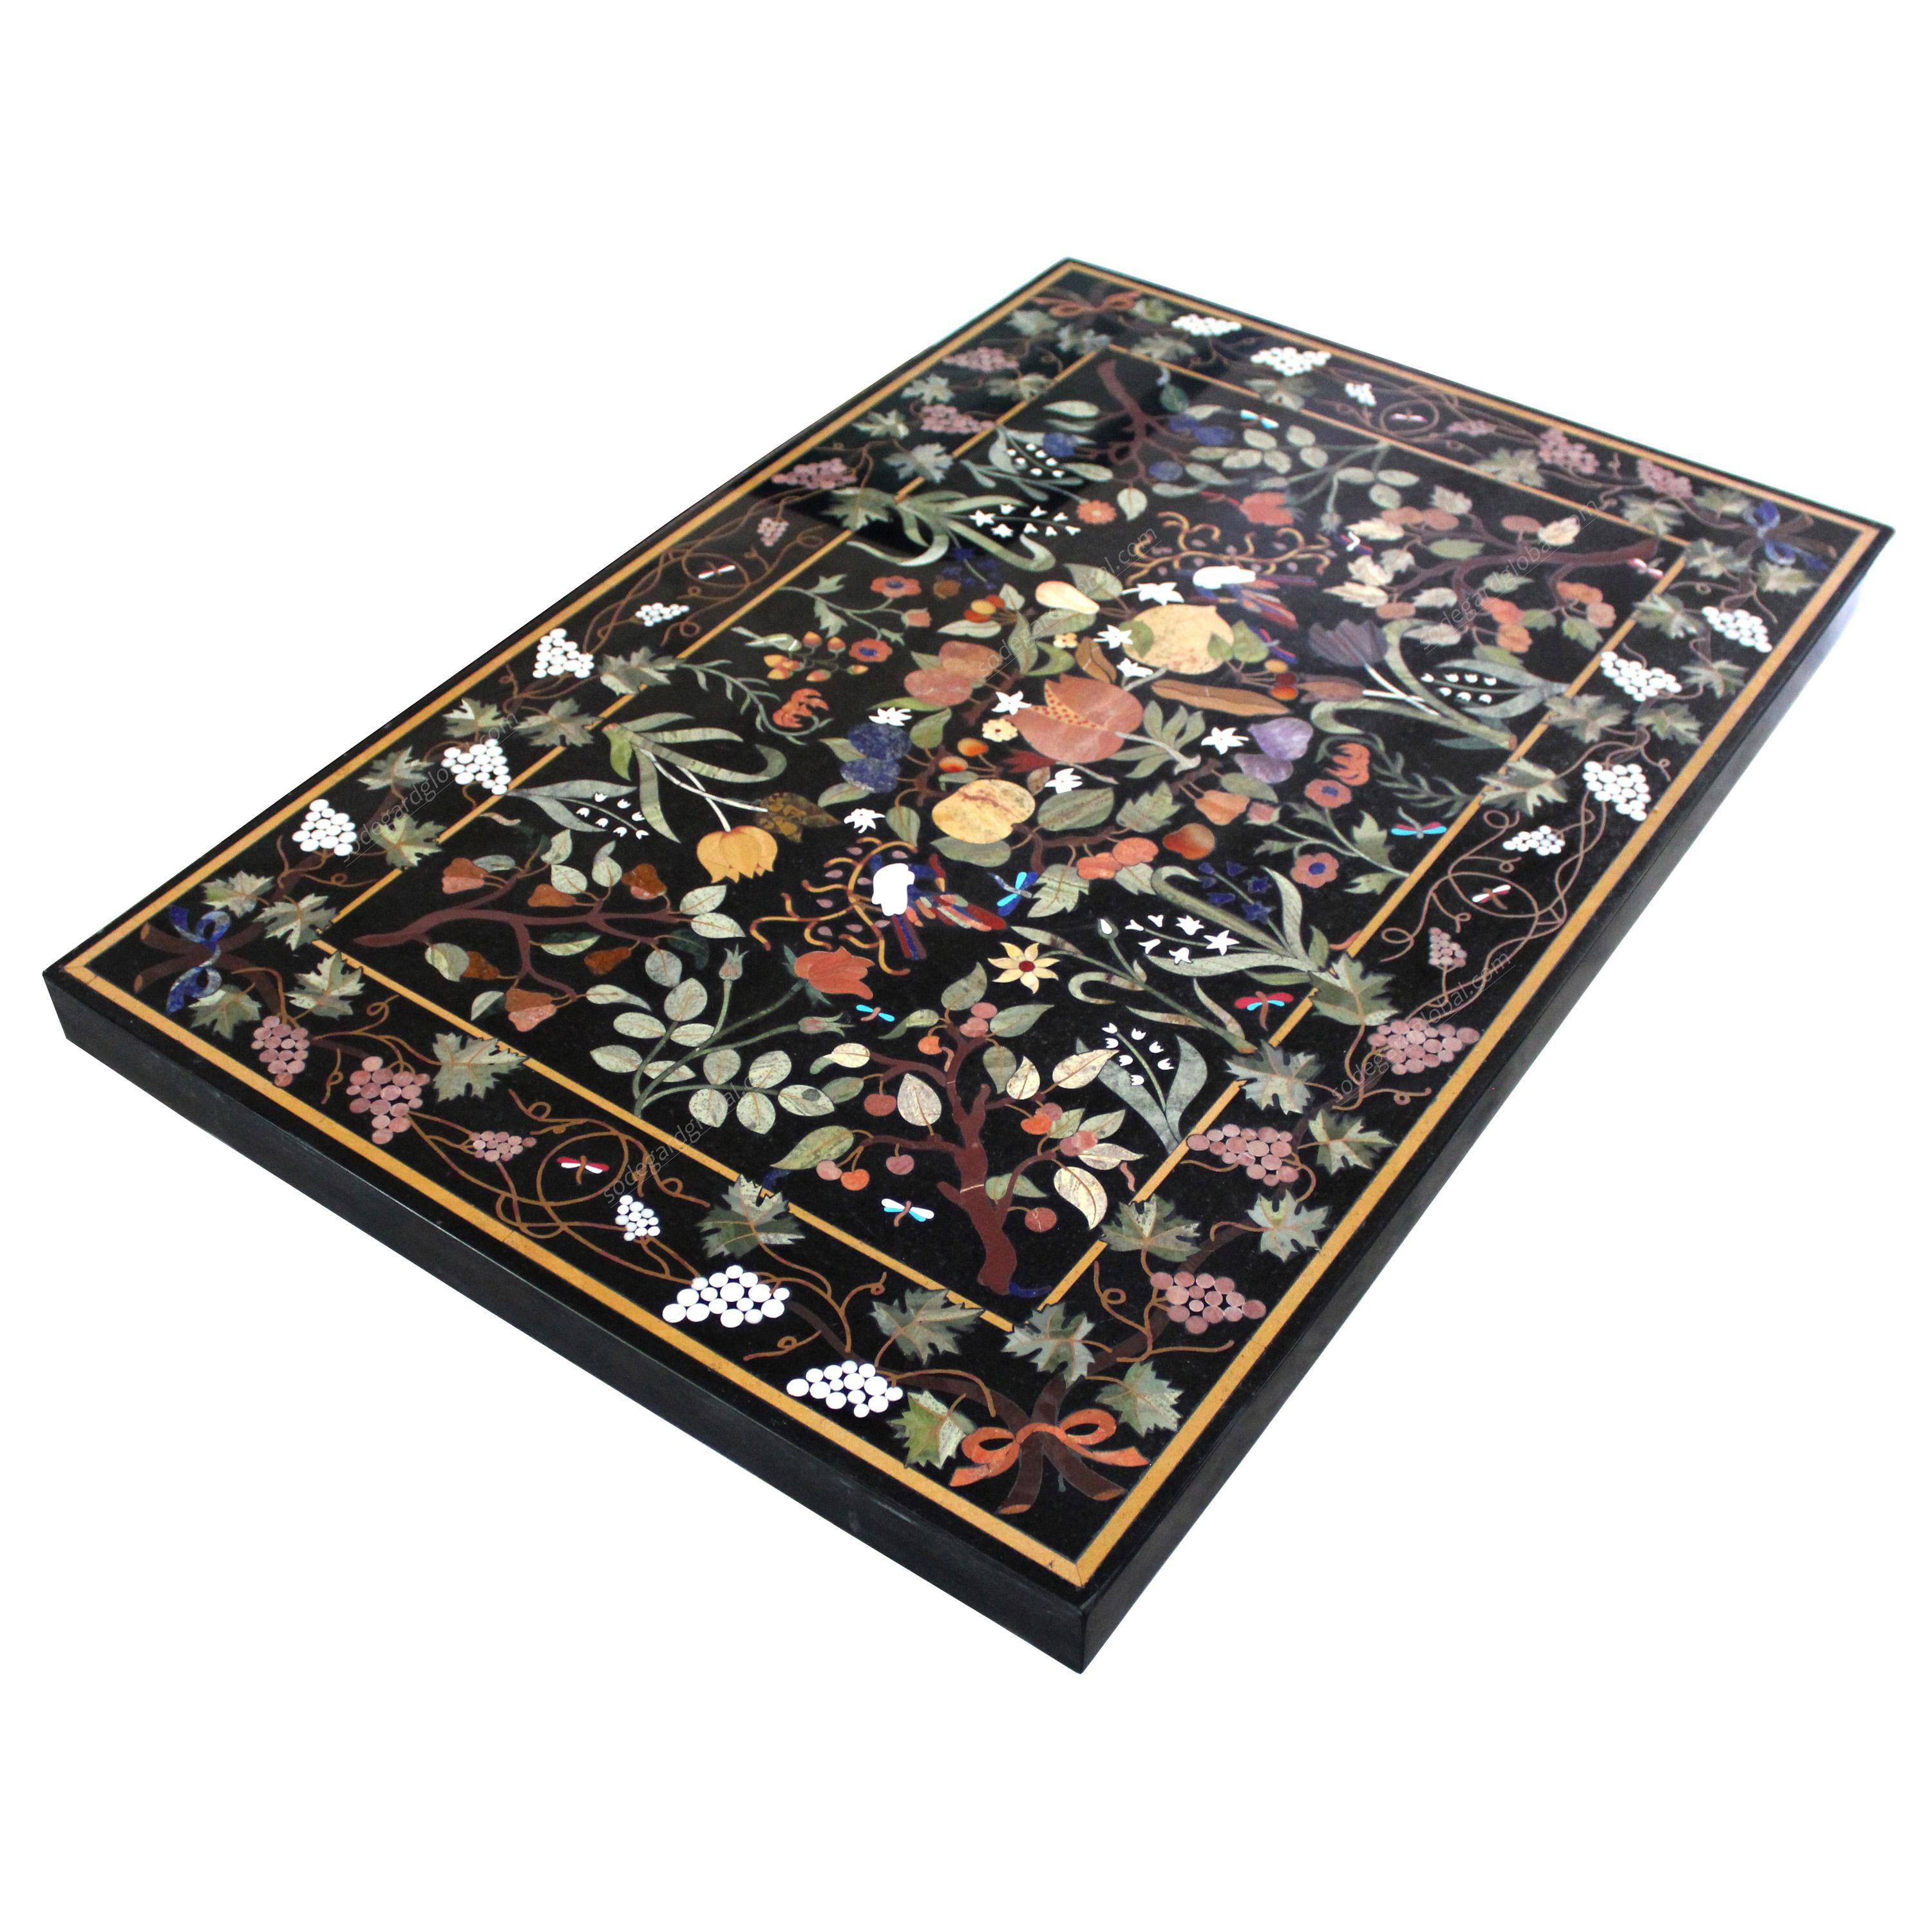 Pietra Dura Small Coffee Table (TOP ONLY) Inlay in Marble by Stephanie Odegard 